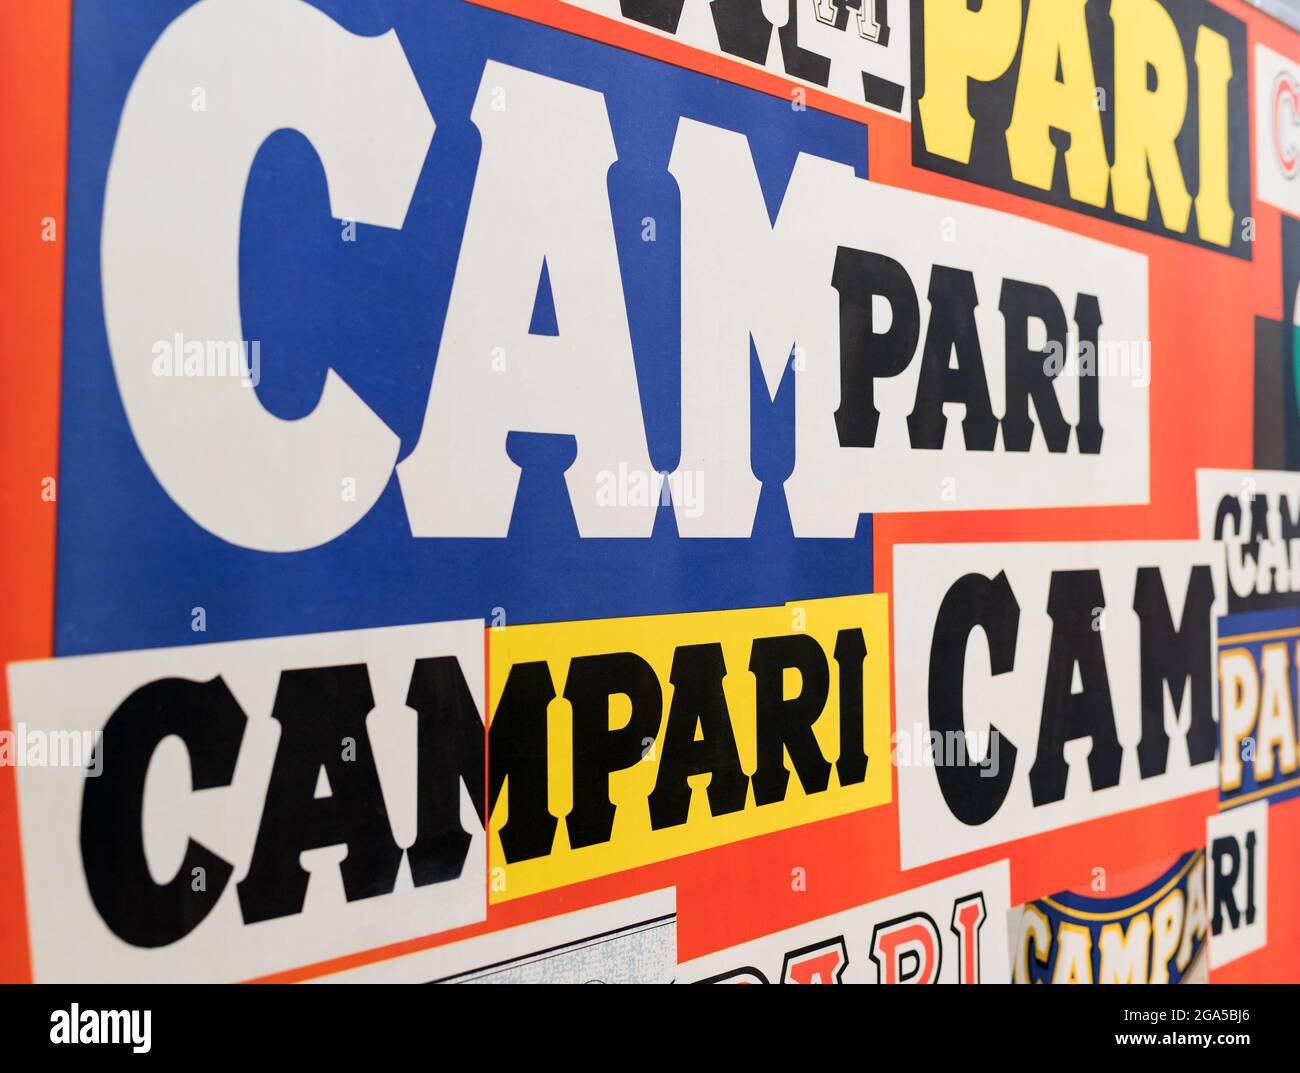 Multicolored vintage Italian Campari logo viewed at an oblique angle with text on colorful backgrounds Stock Photo